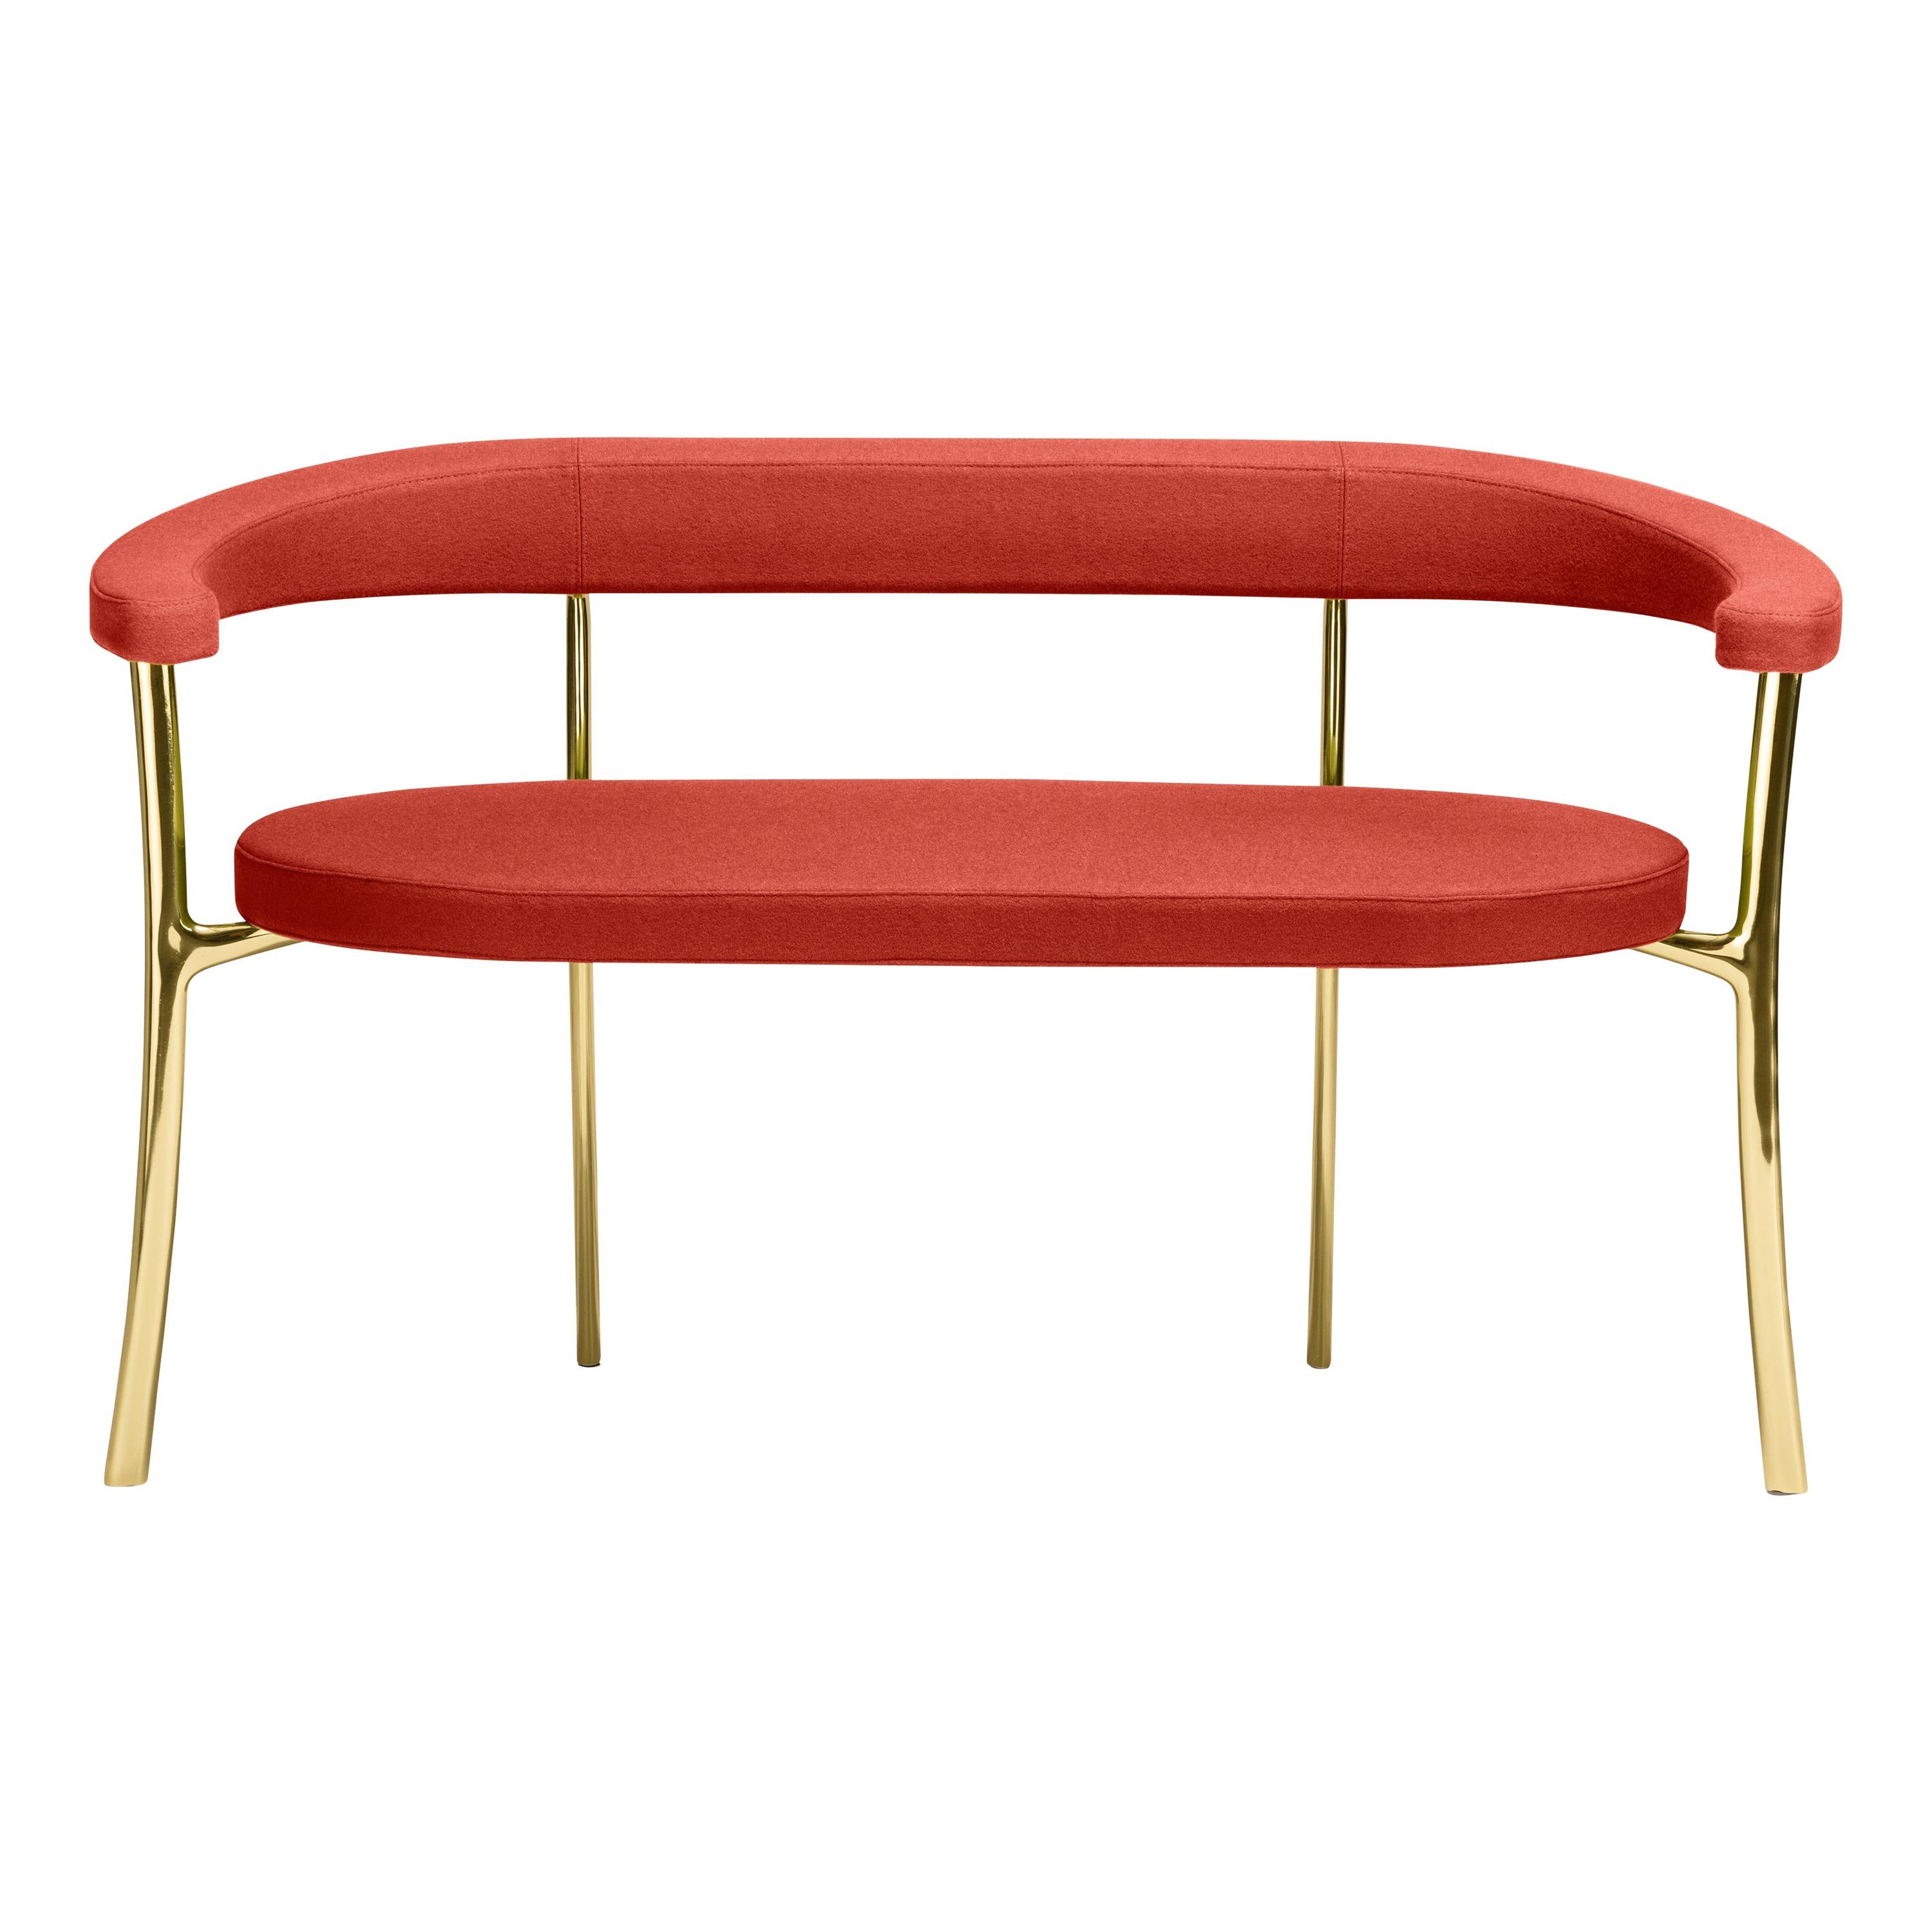 Ghidini1961 Katana bench in Fabric with Polished Brass Legs by Paolo Rizzatto